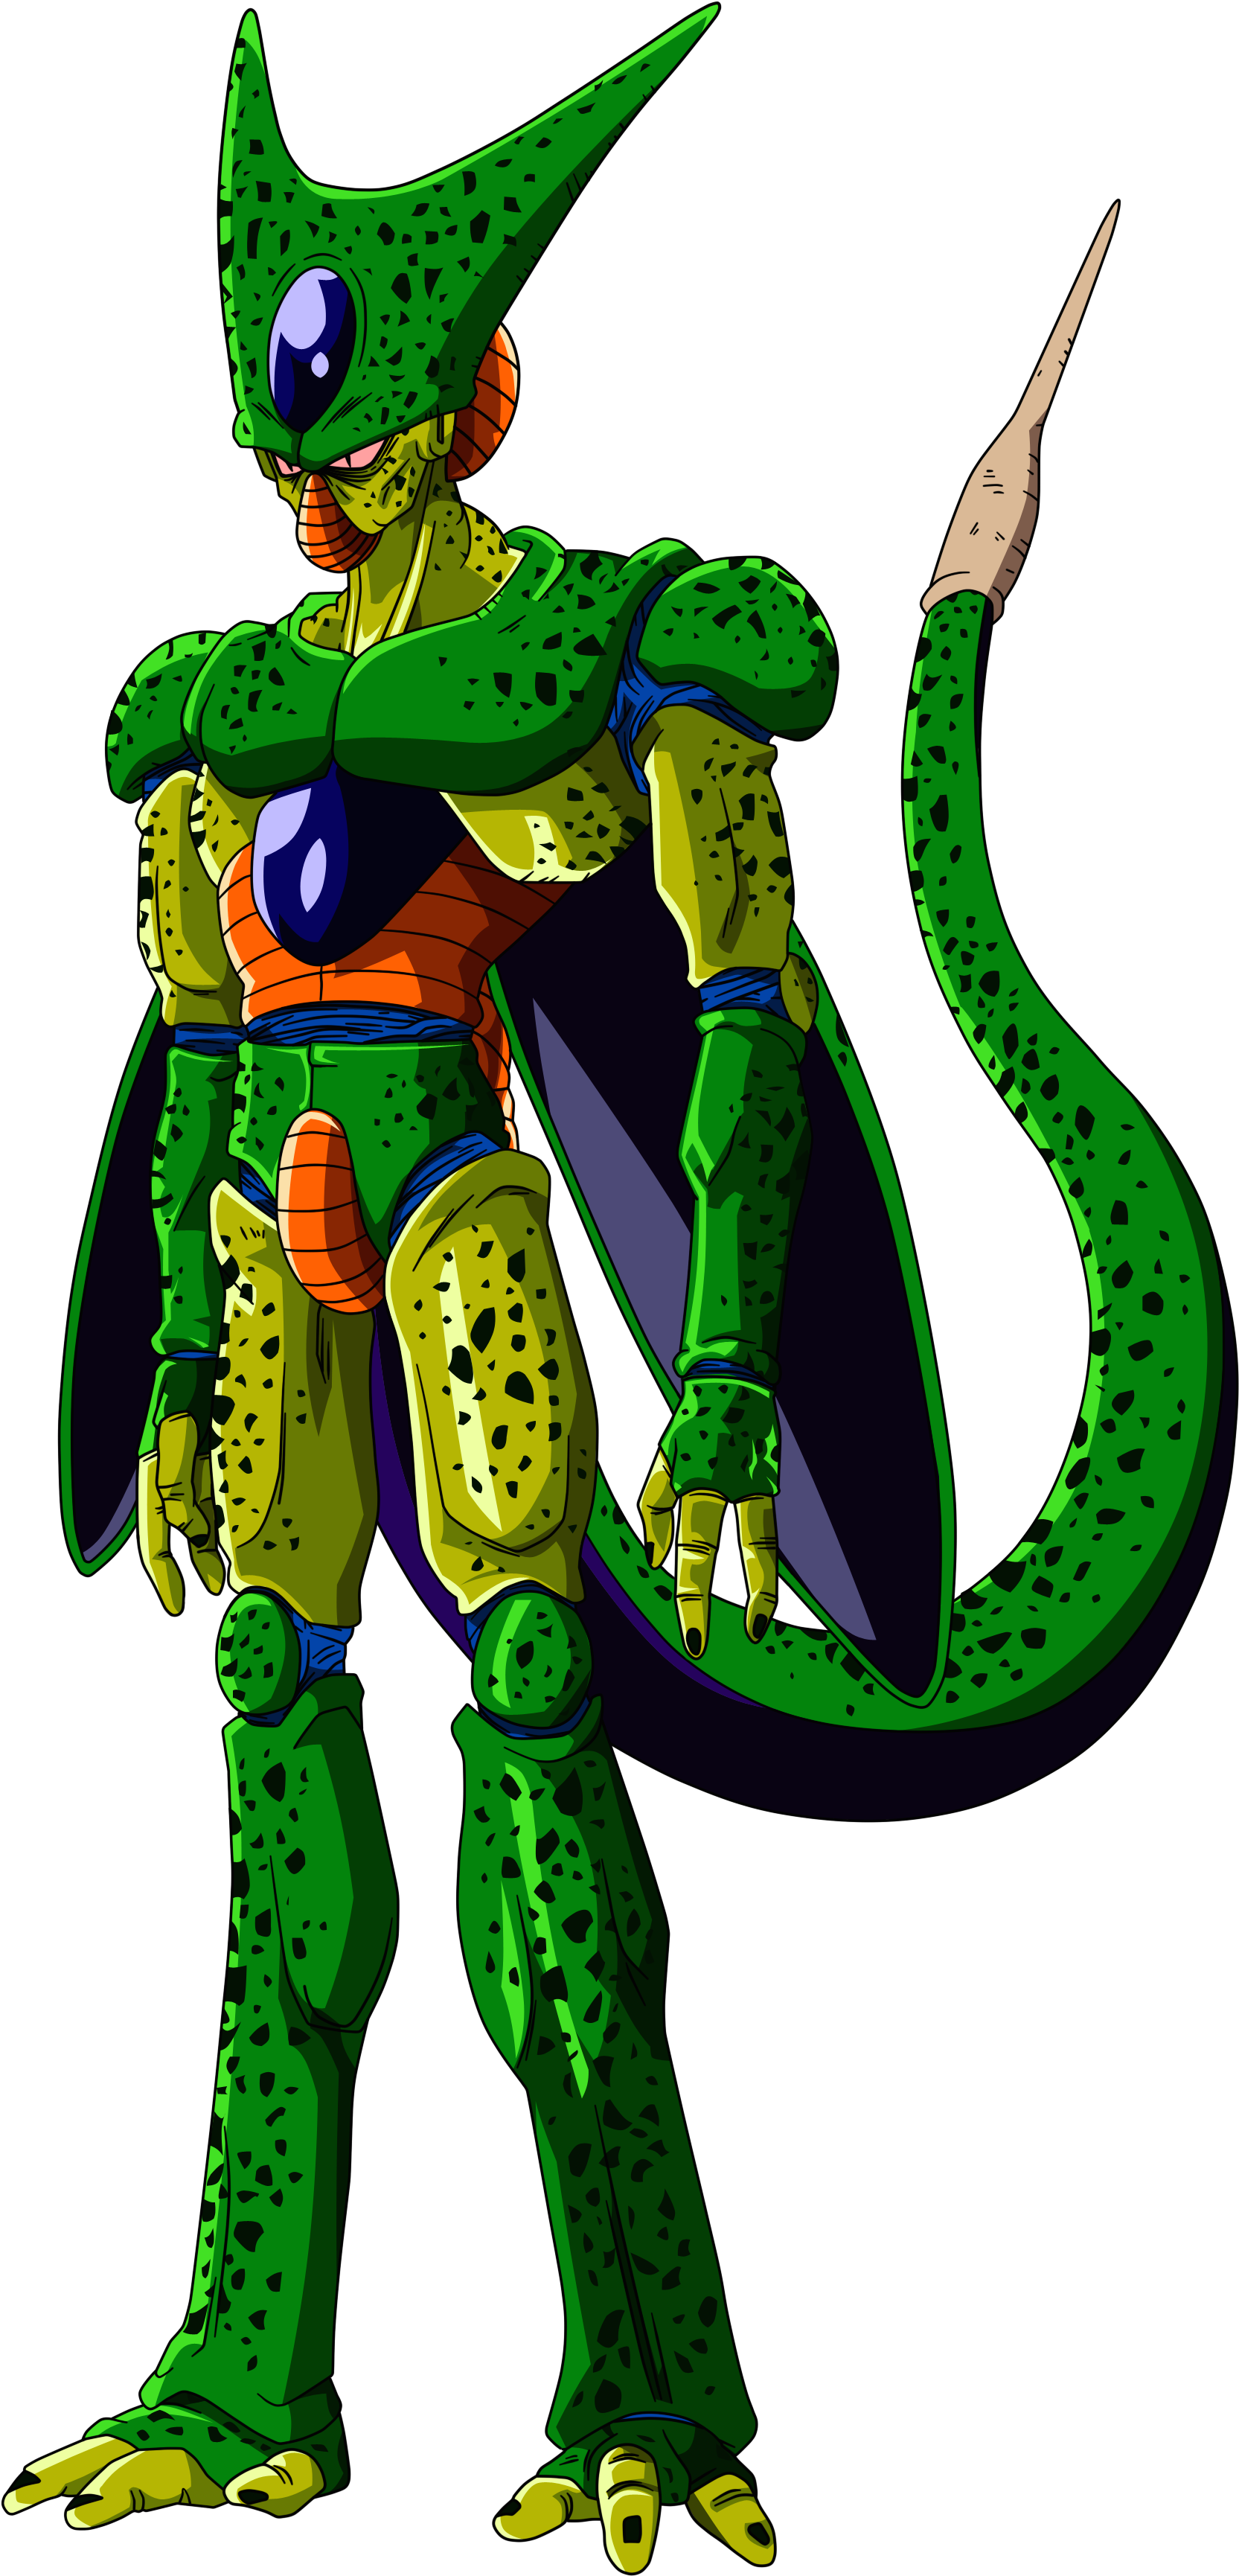 Cell First Form - Cell Dragon Ball Z (1950x3653)